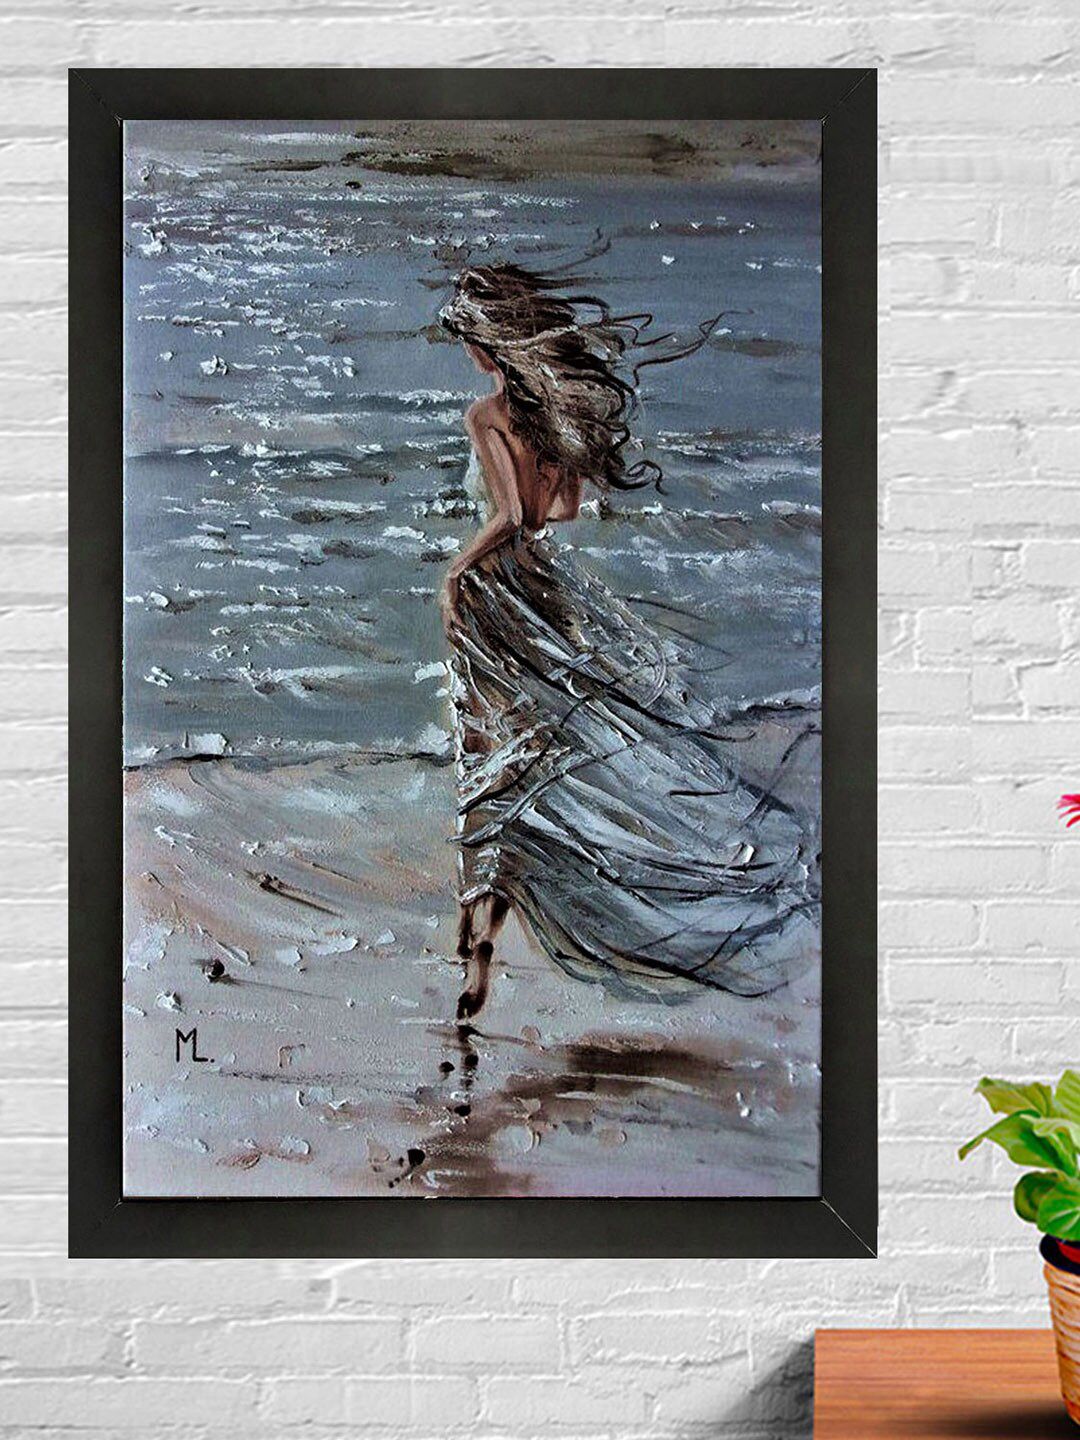 Gallery99 Grey Handmade Framed Oil Painting Price in India